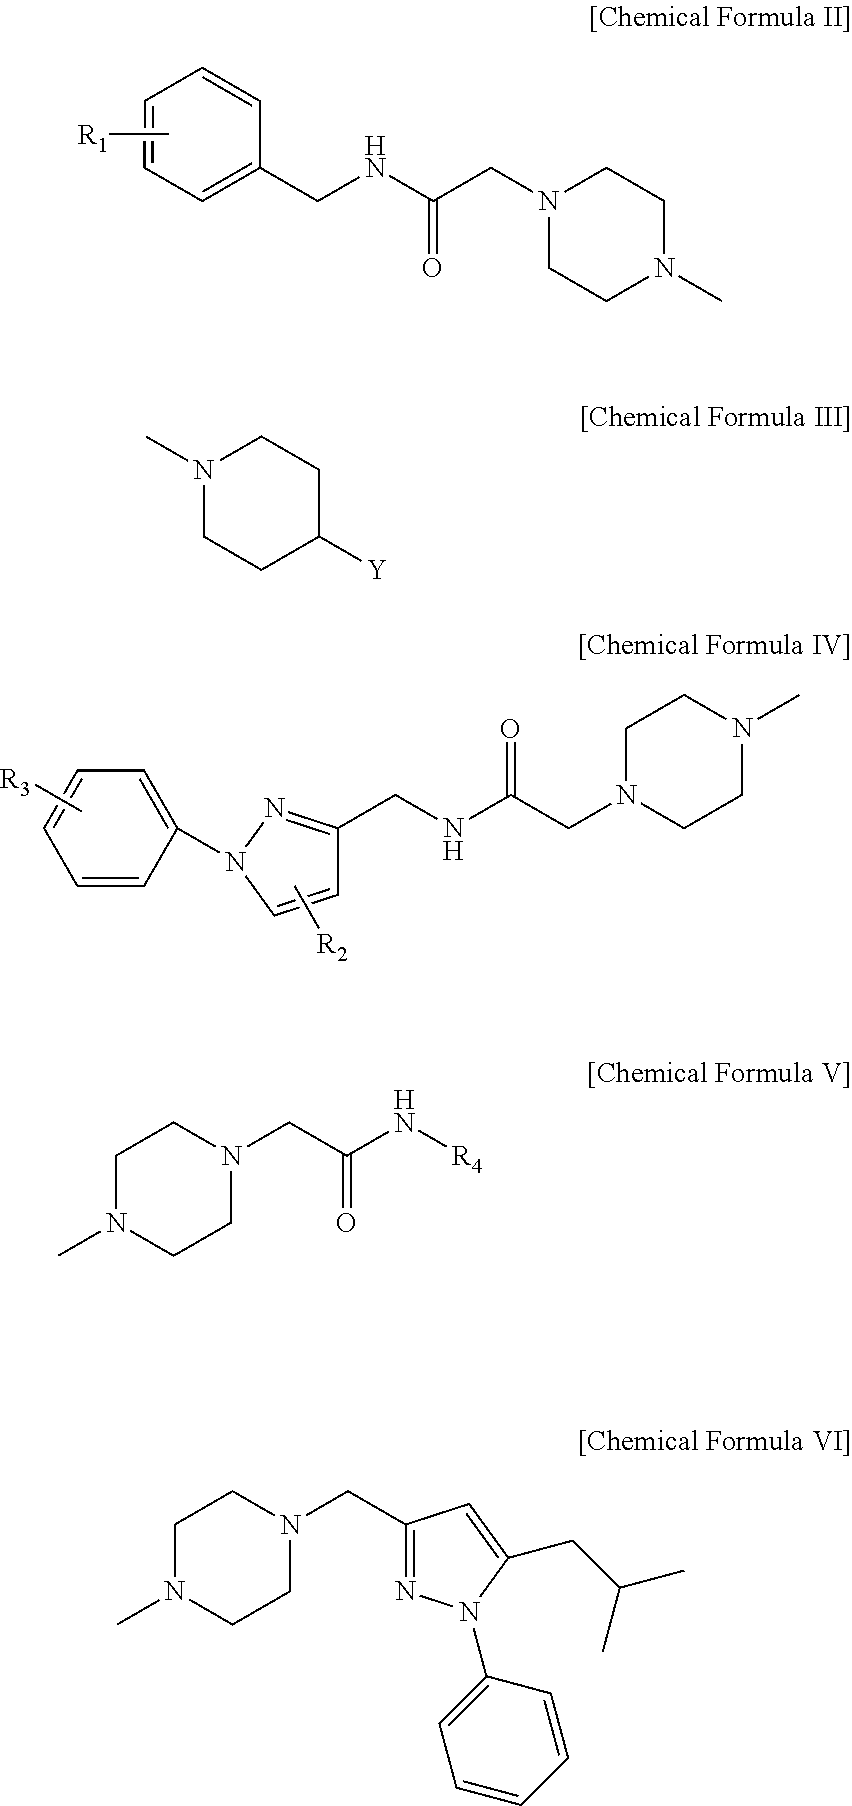 Derivatives of 1-phenoxy propan-2-ol and pharmaceutical composition containing the same